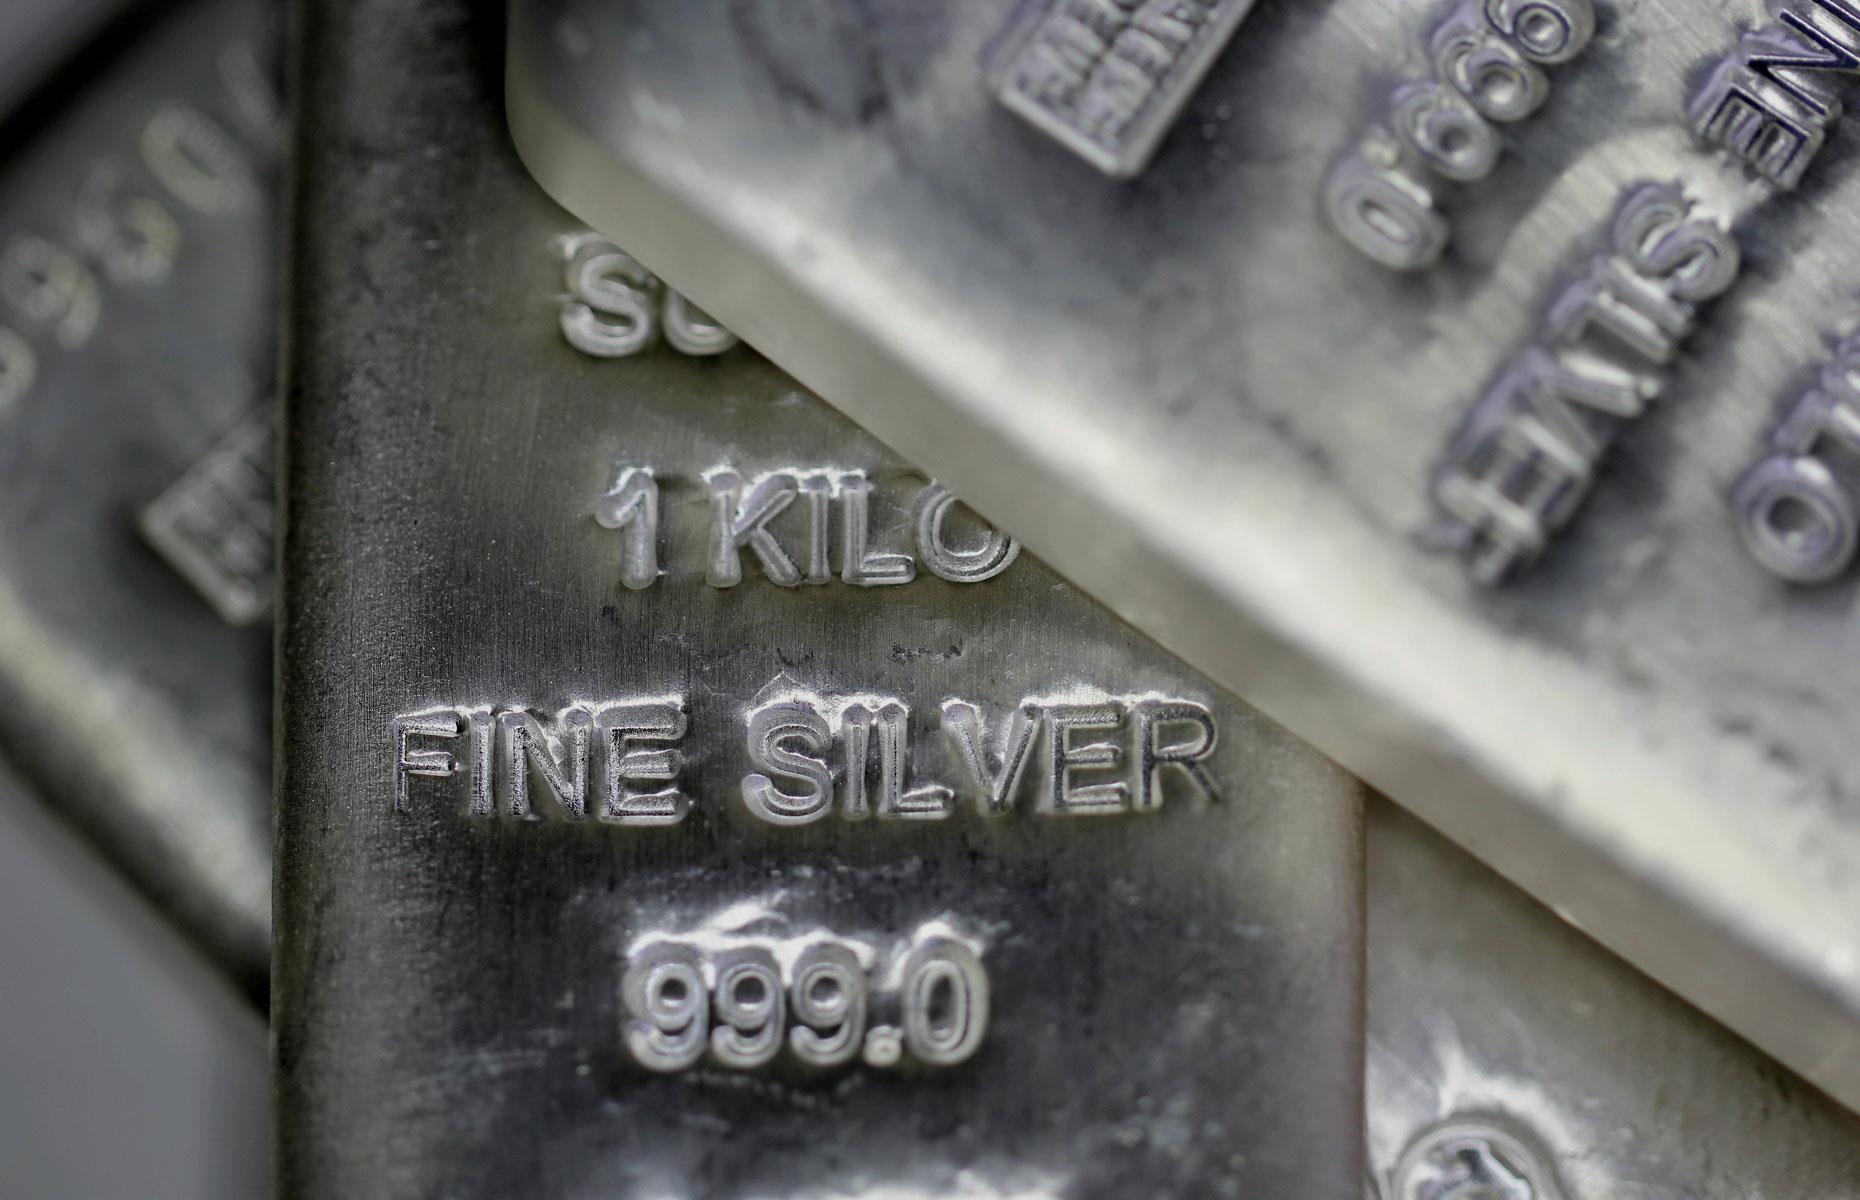 1951 – silver: $1,000 invested then is worth $33,935 (£25.7k) today